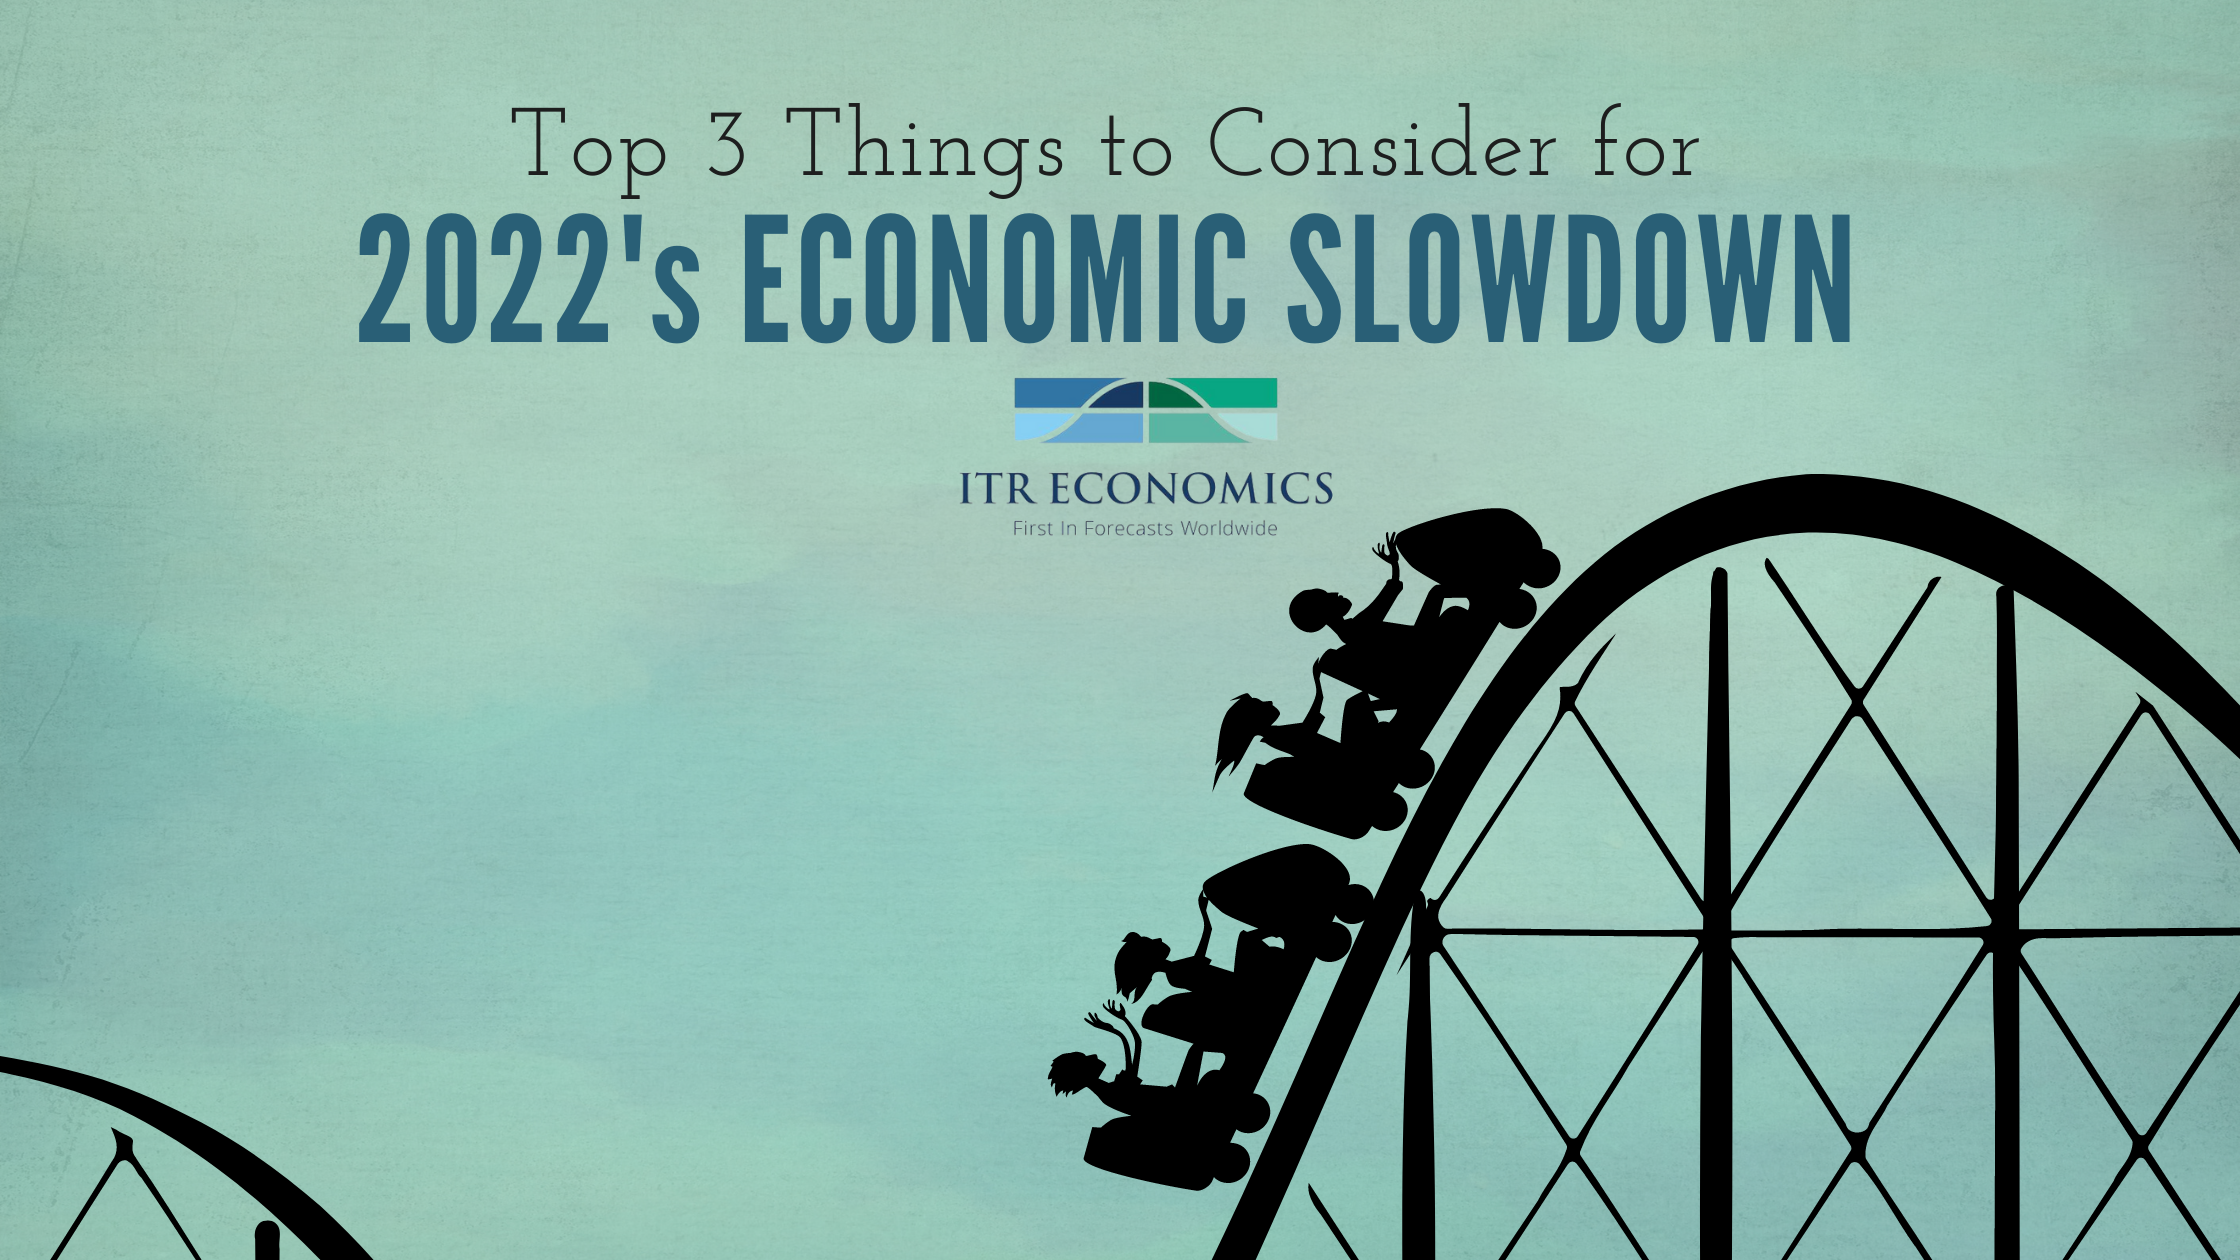 Top 3 Things to Consider for 2022’s Economic Slowdown